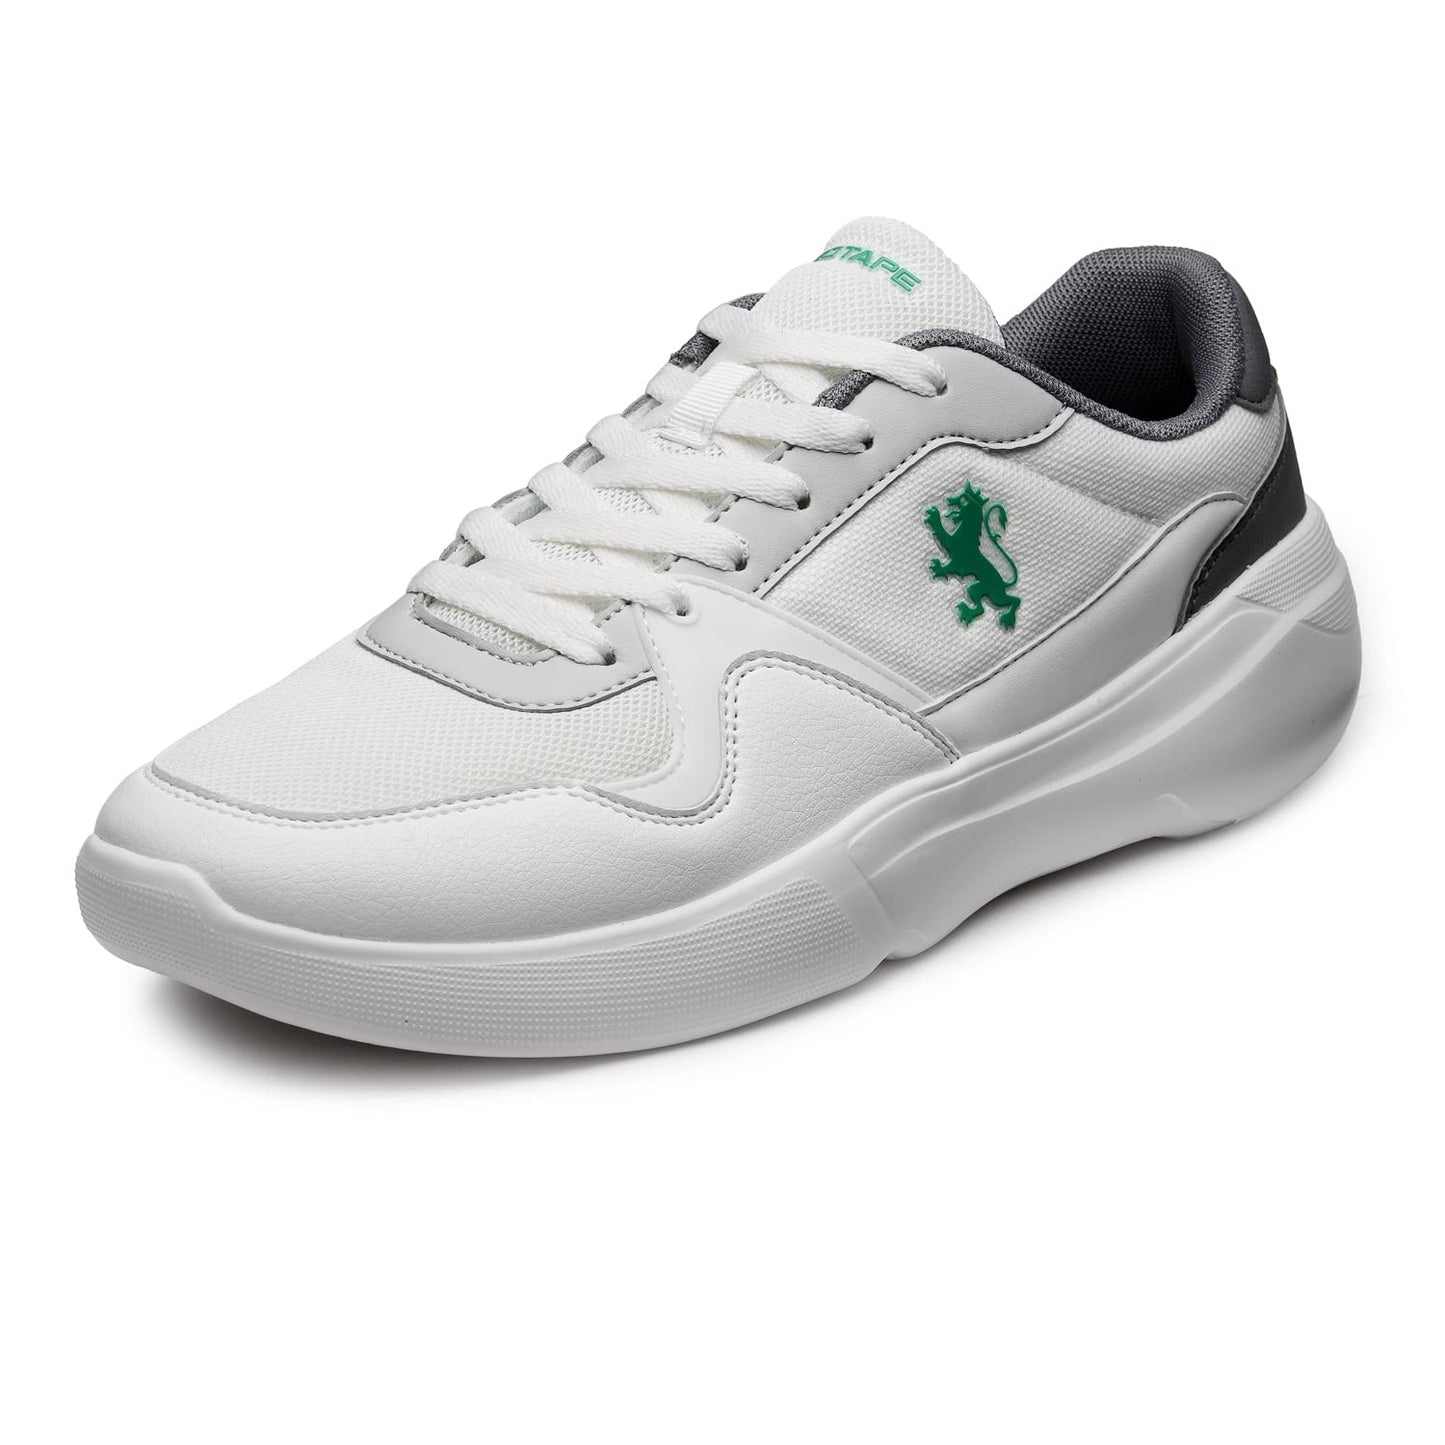 Red Tape Casual Sneakers for Men | Comfortable, Shock Absorbant & Slip-Resistant White/Green